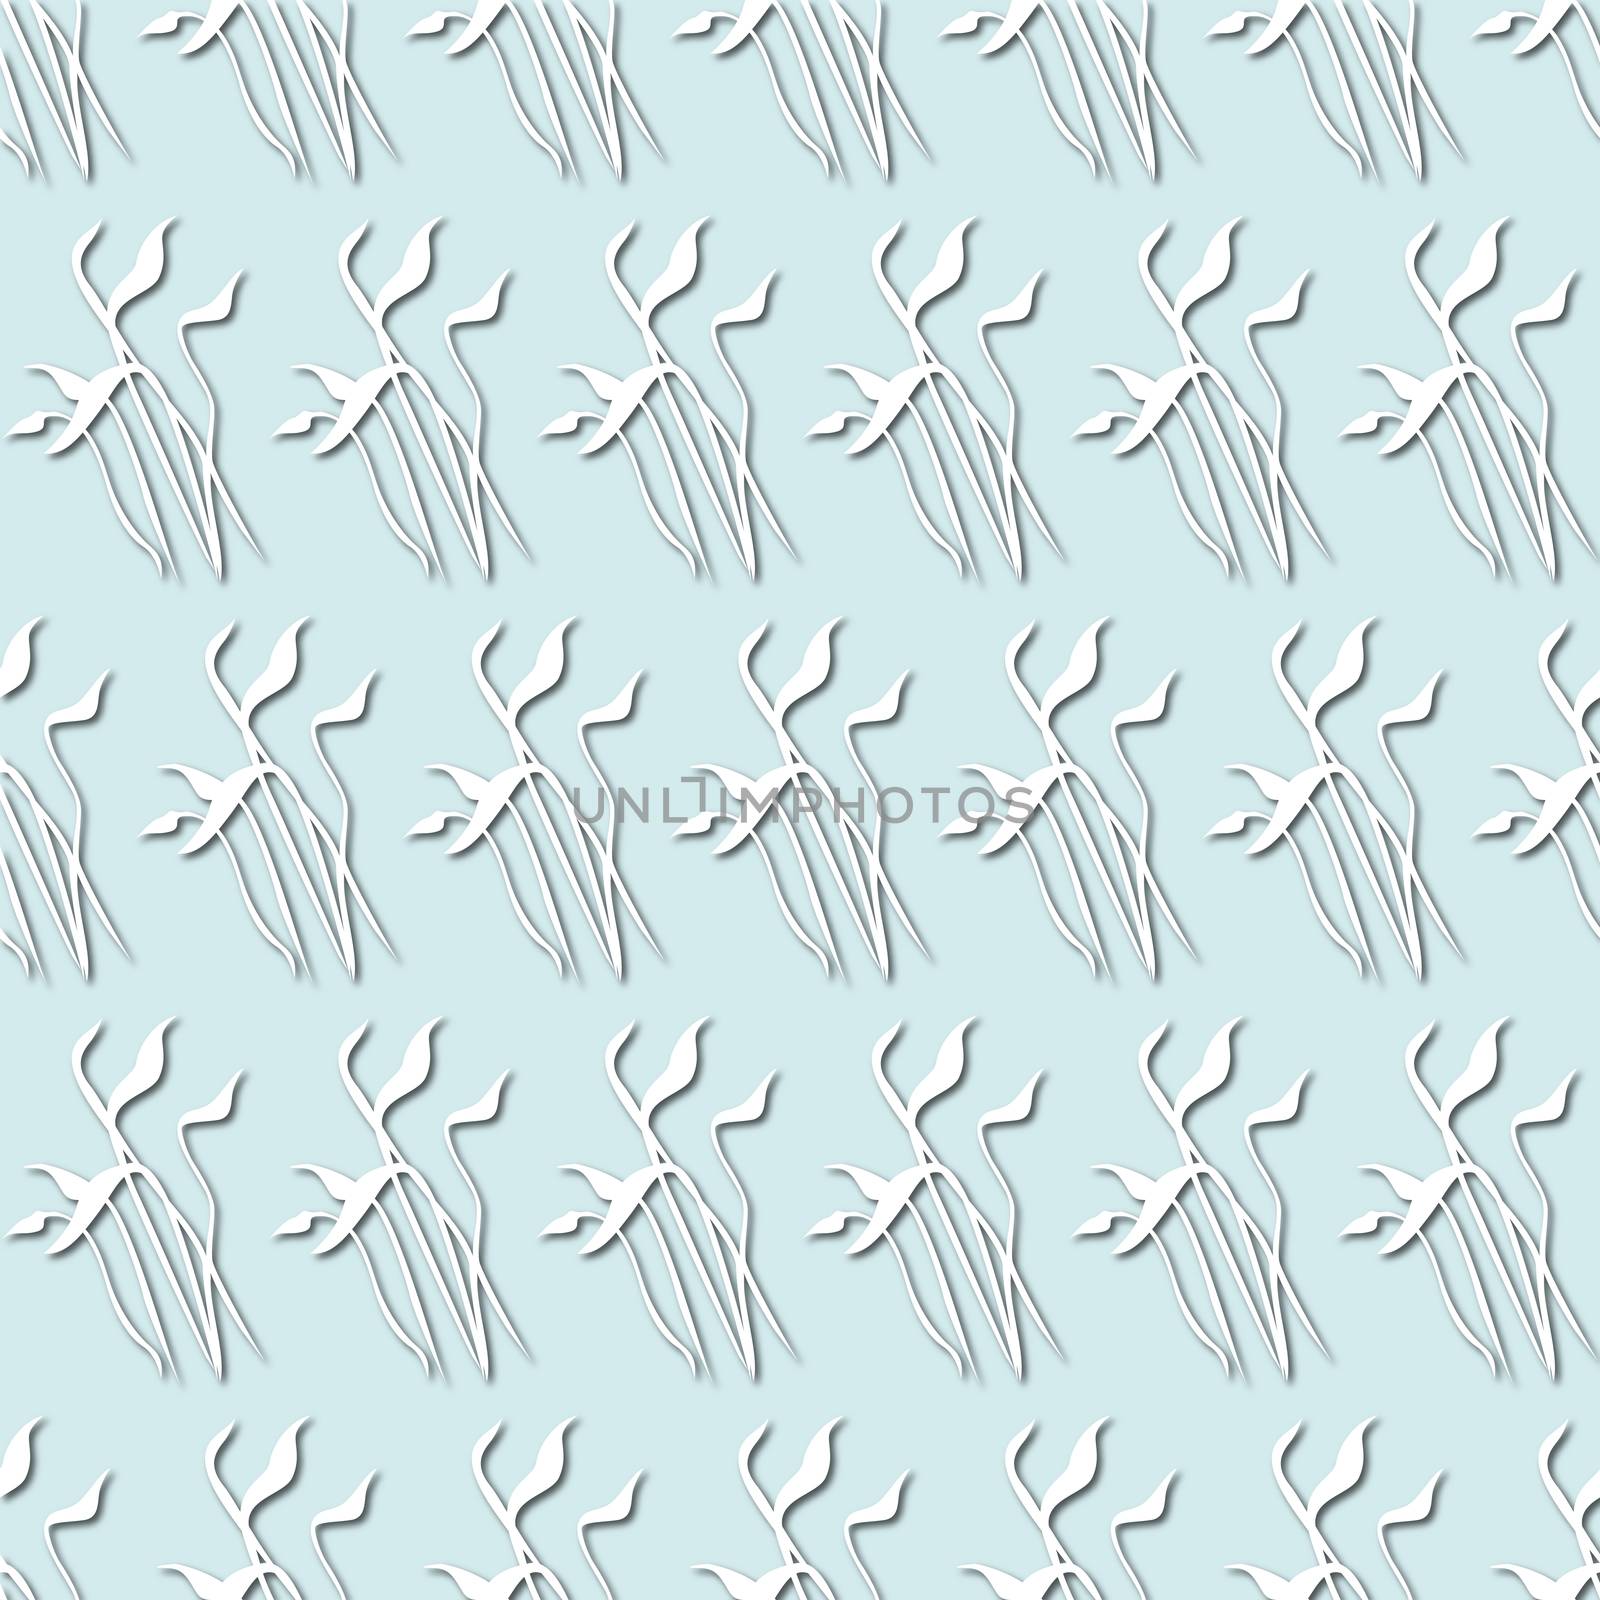 White plant, flowers silhouette on pale blue background, seamless pattern. Paper cut style with drop shadows and highlights.